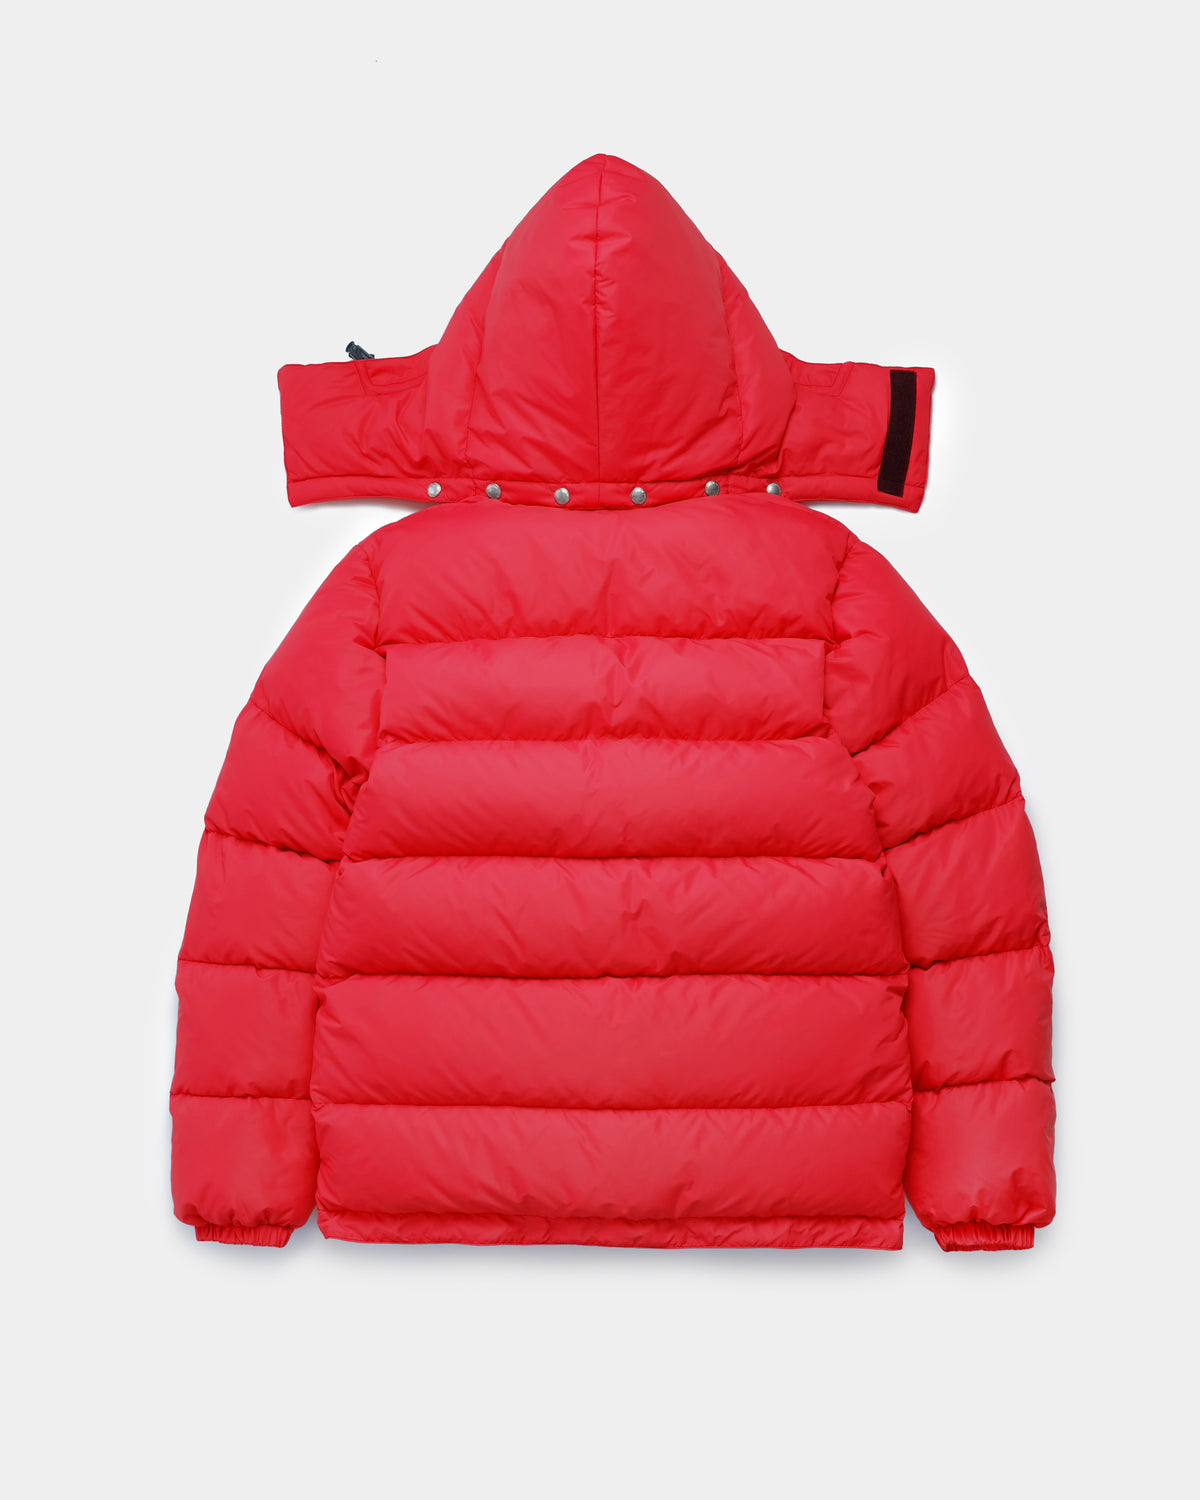 Back view of the Classico Parka in red nylon on a white background.